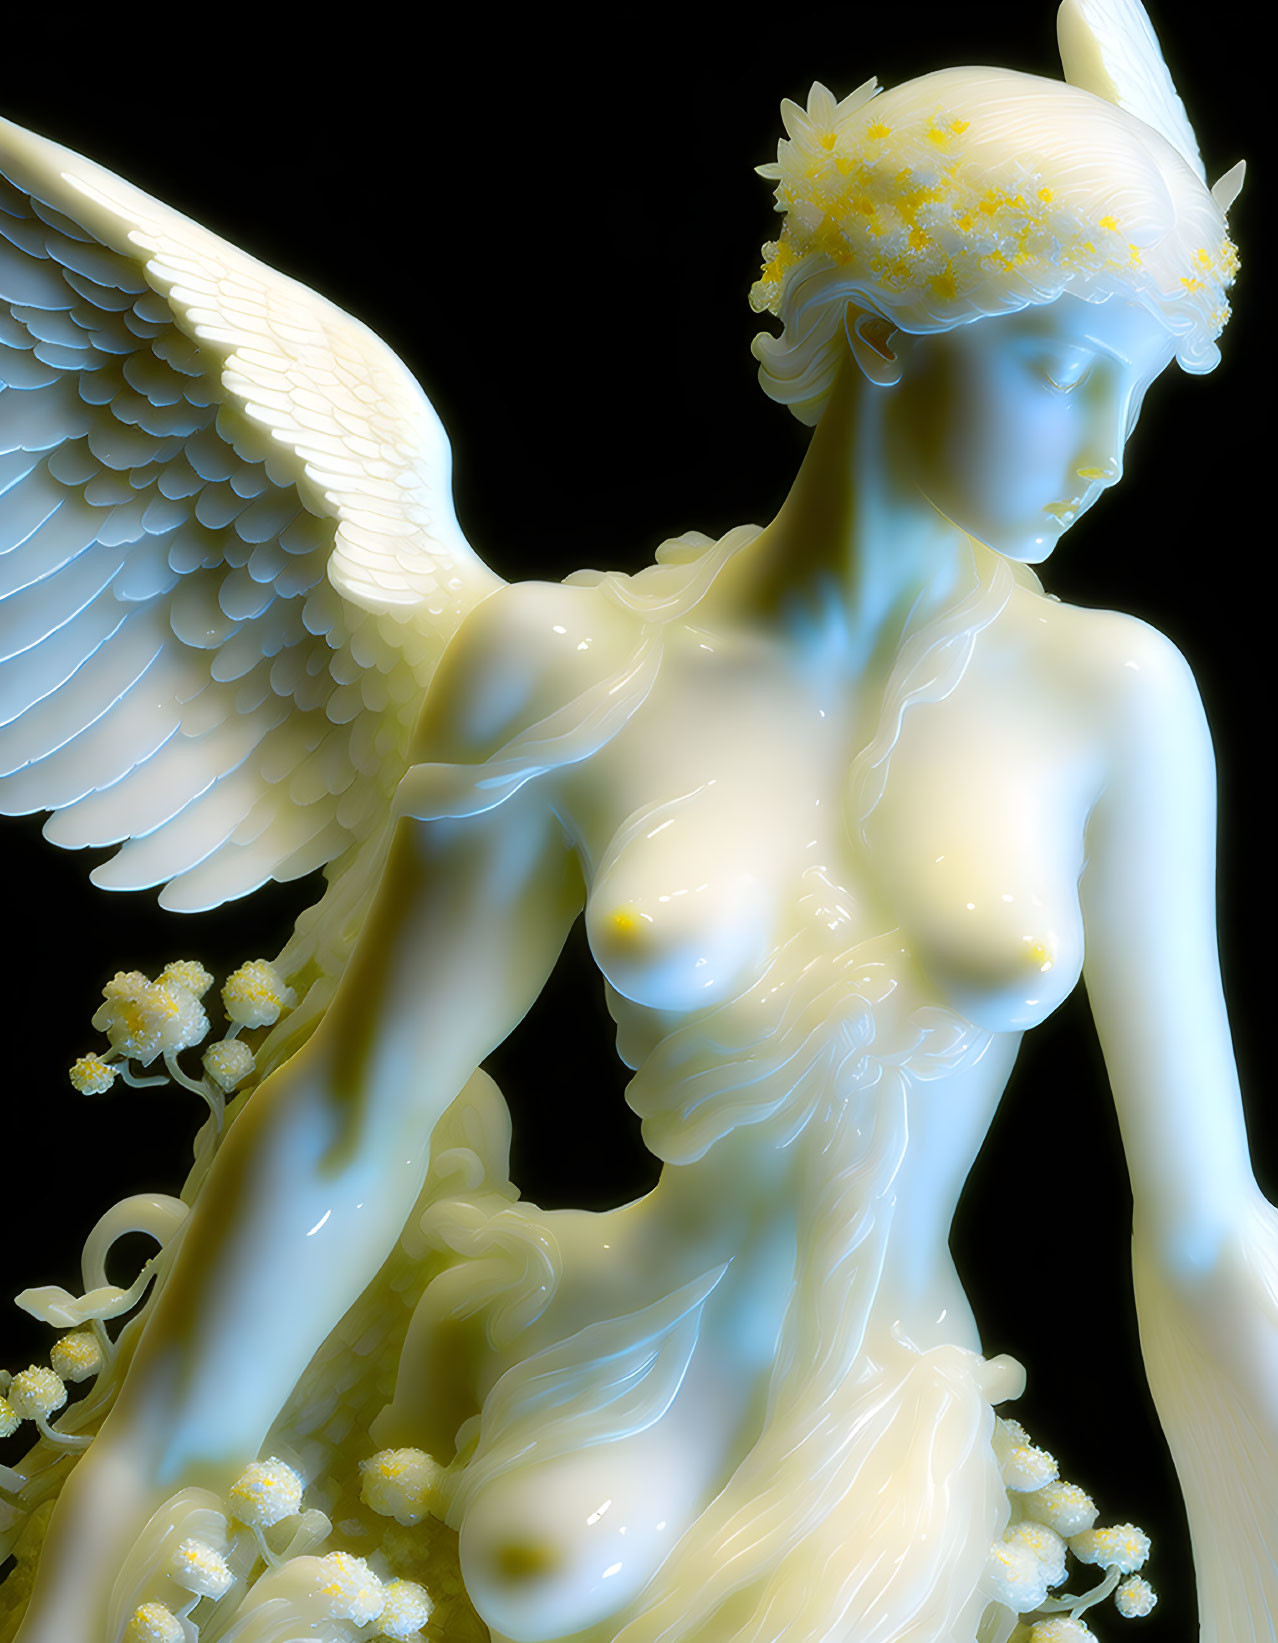 Ethereal angel statue with wings and floral crown on dark background